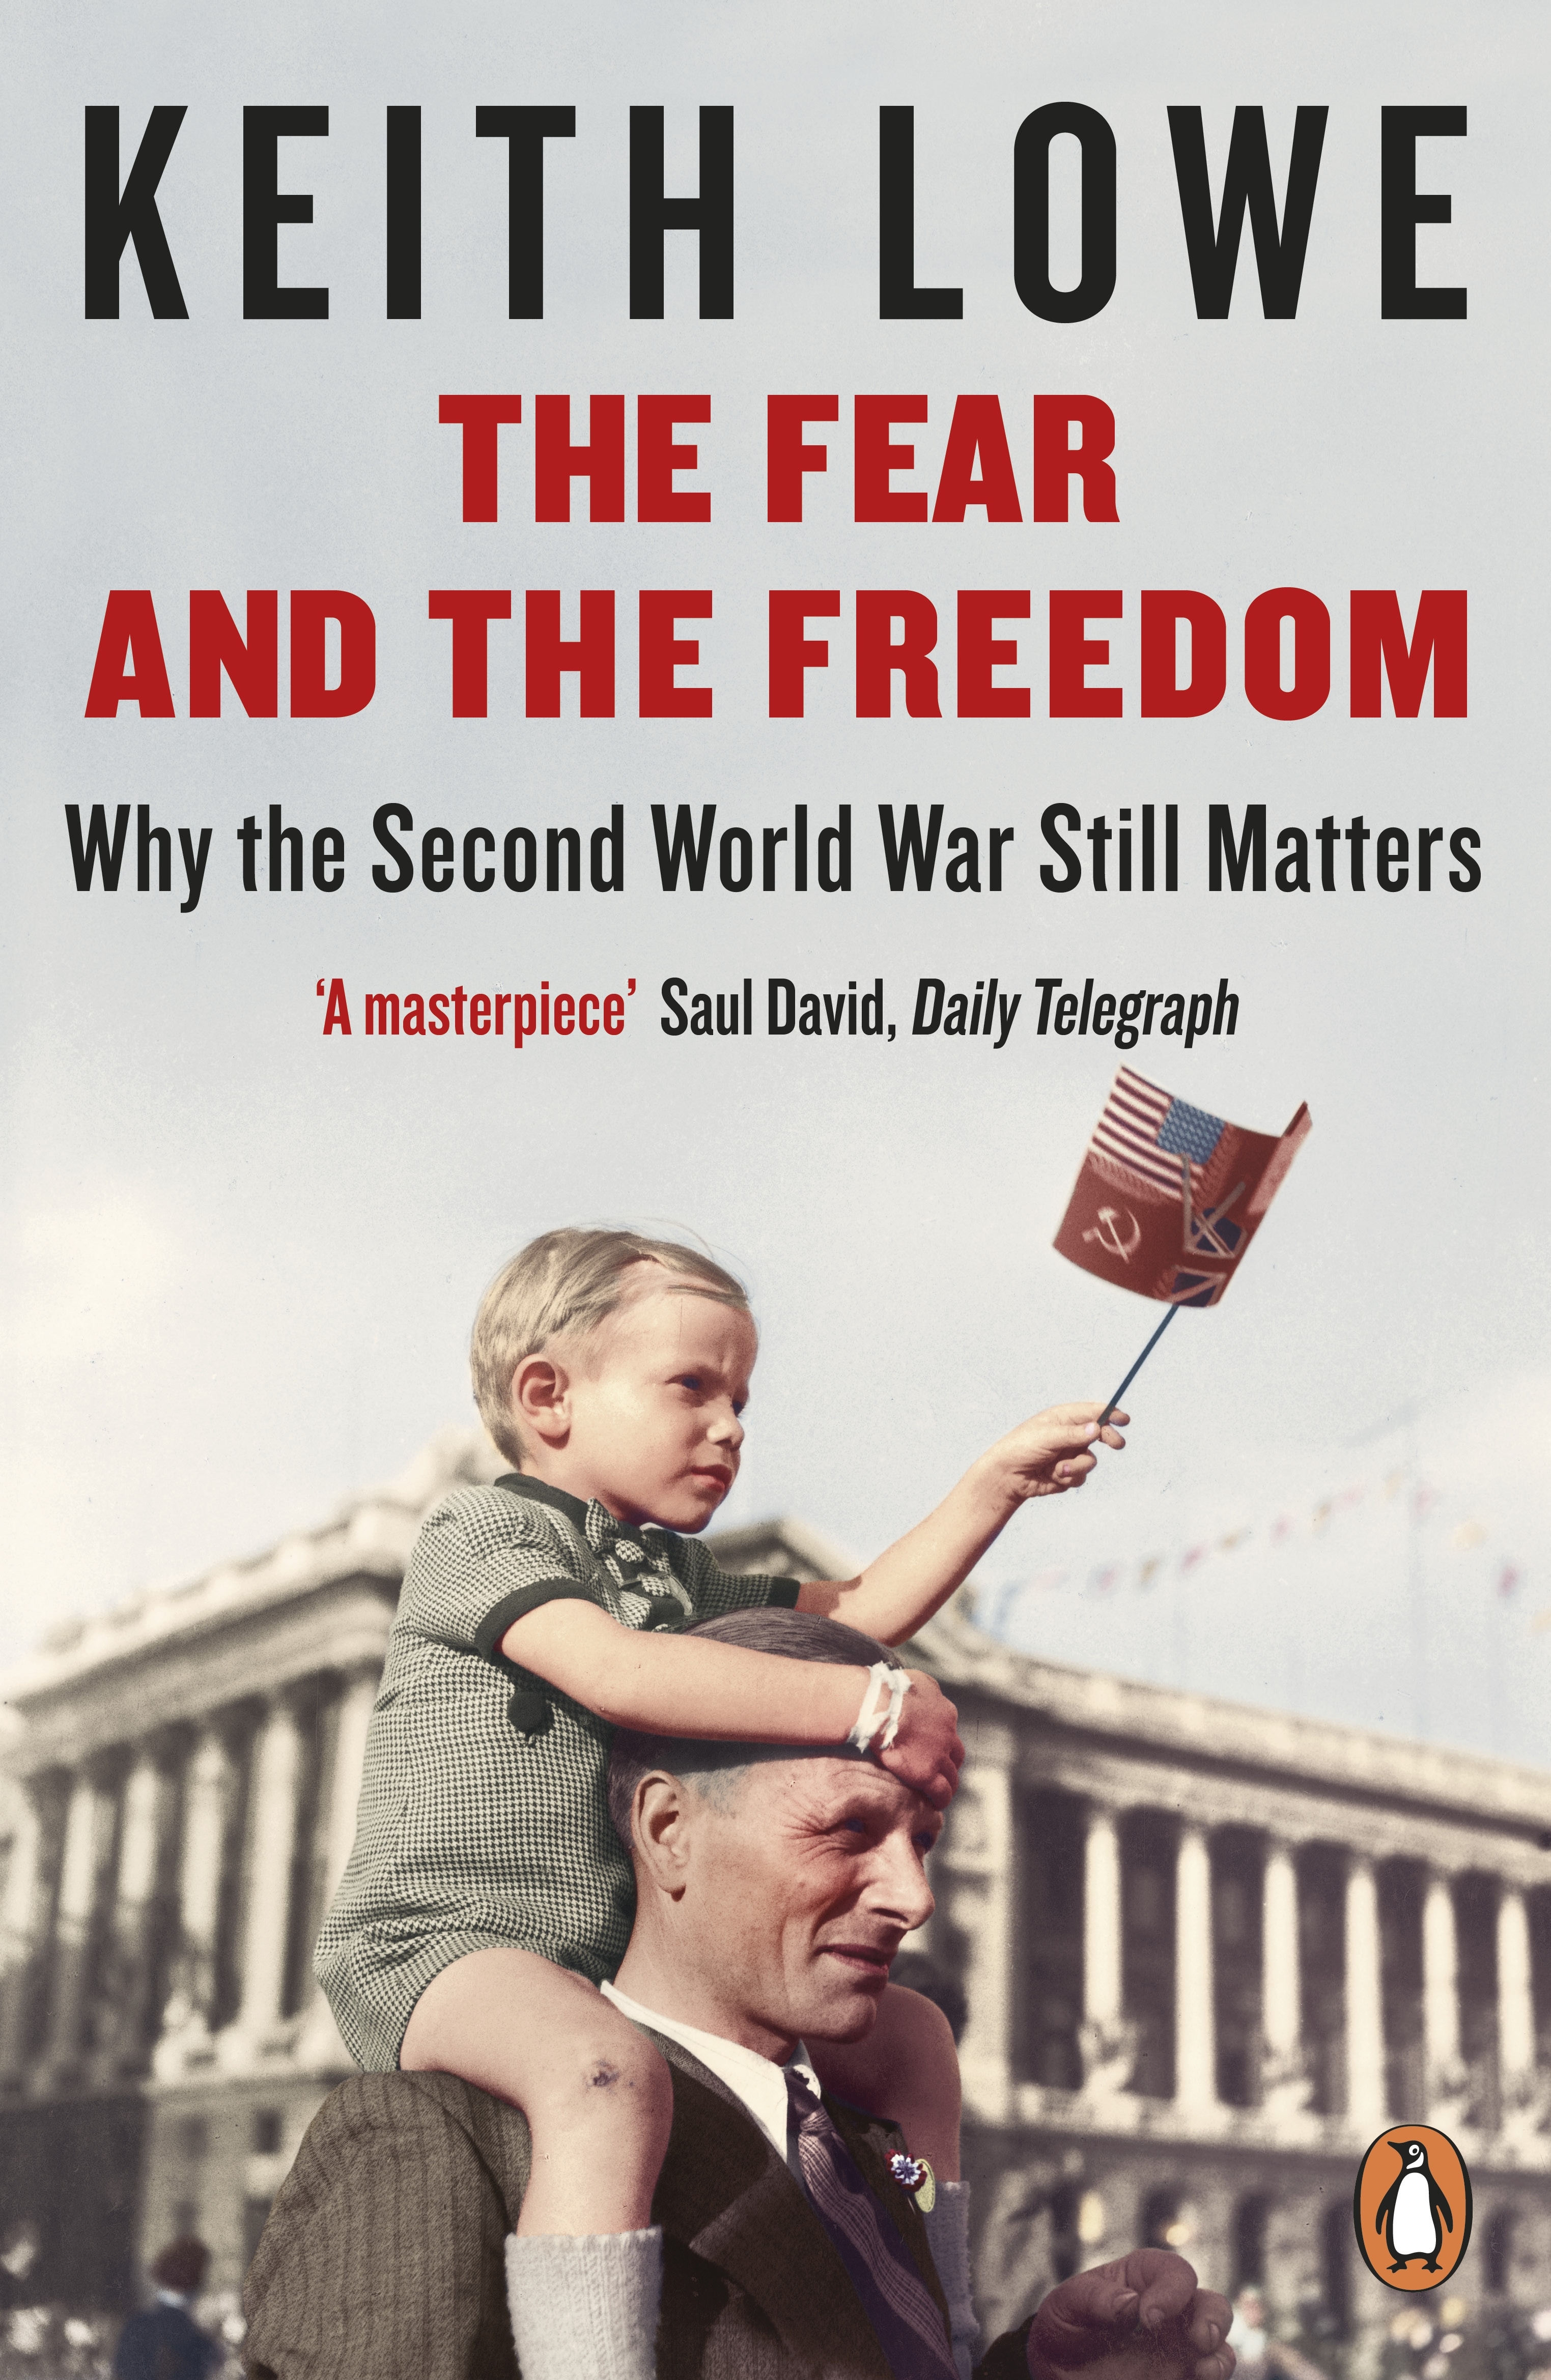 Book “The Fear and the Freedom” by Keith Lowe — June 7, 2018